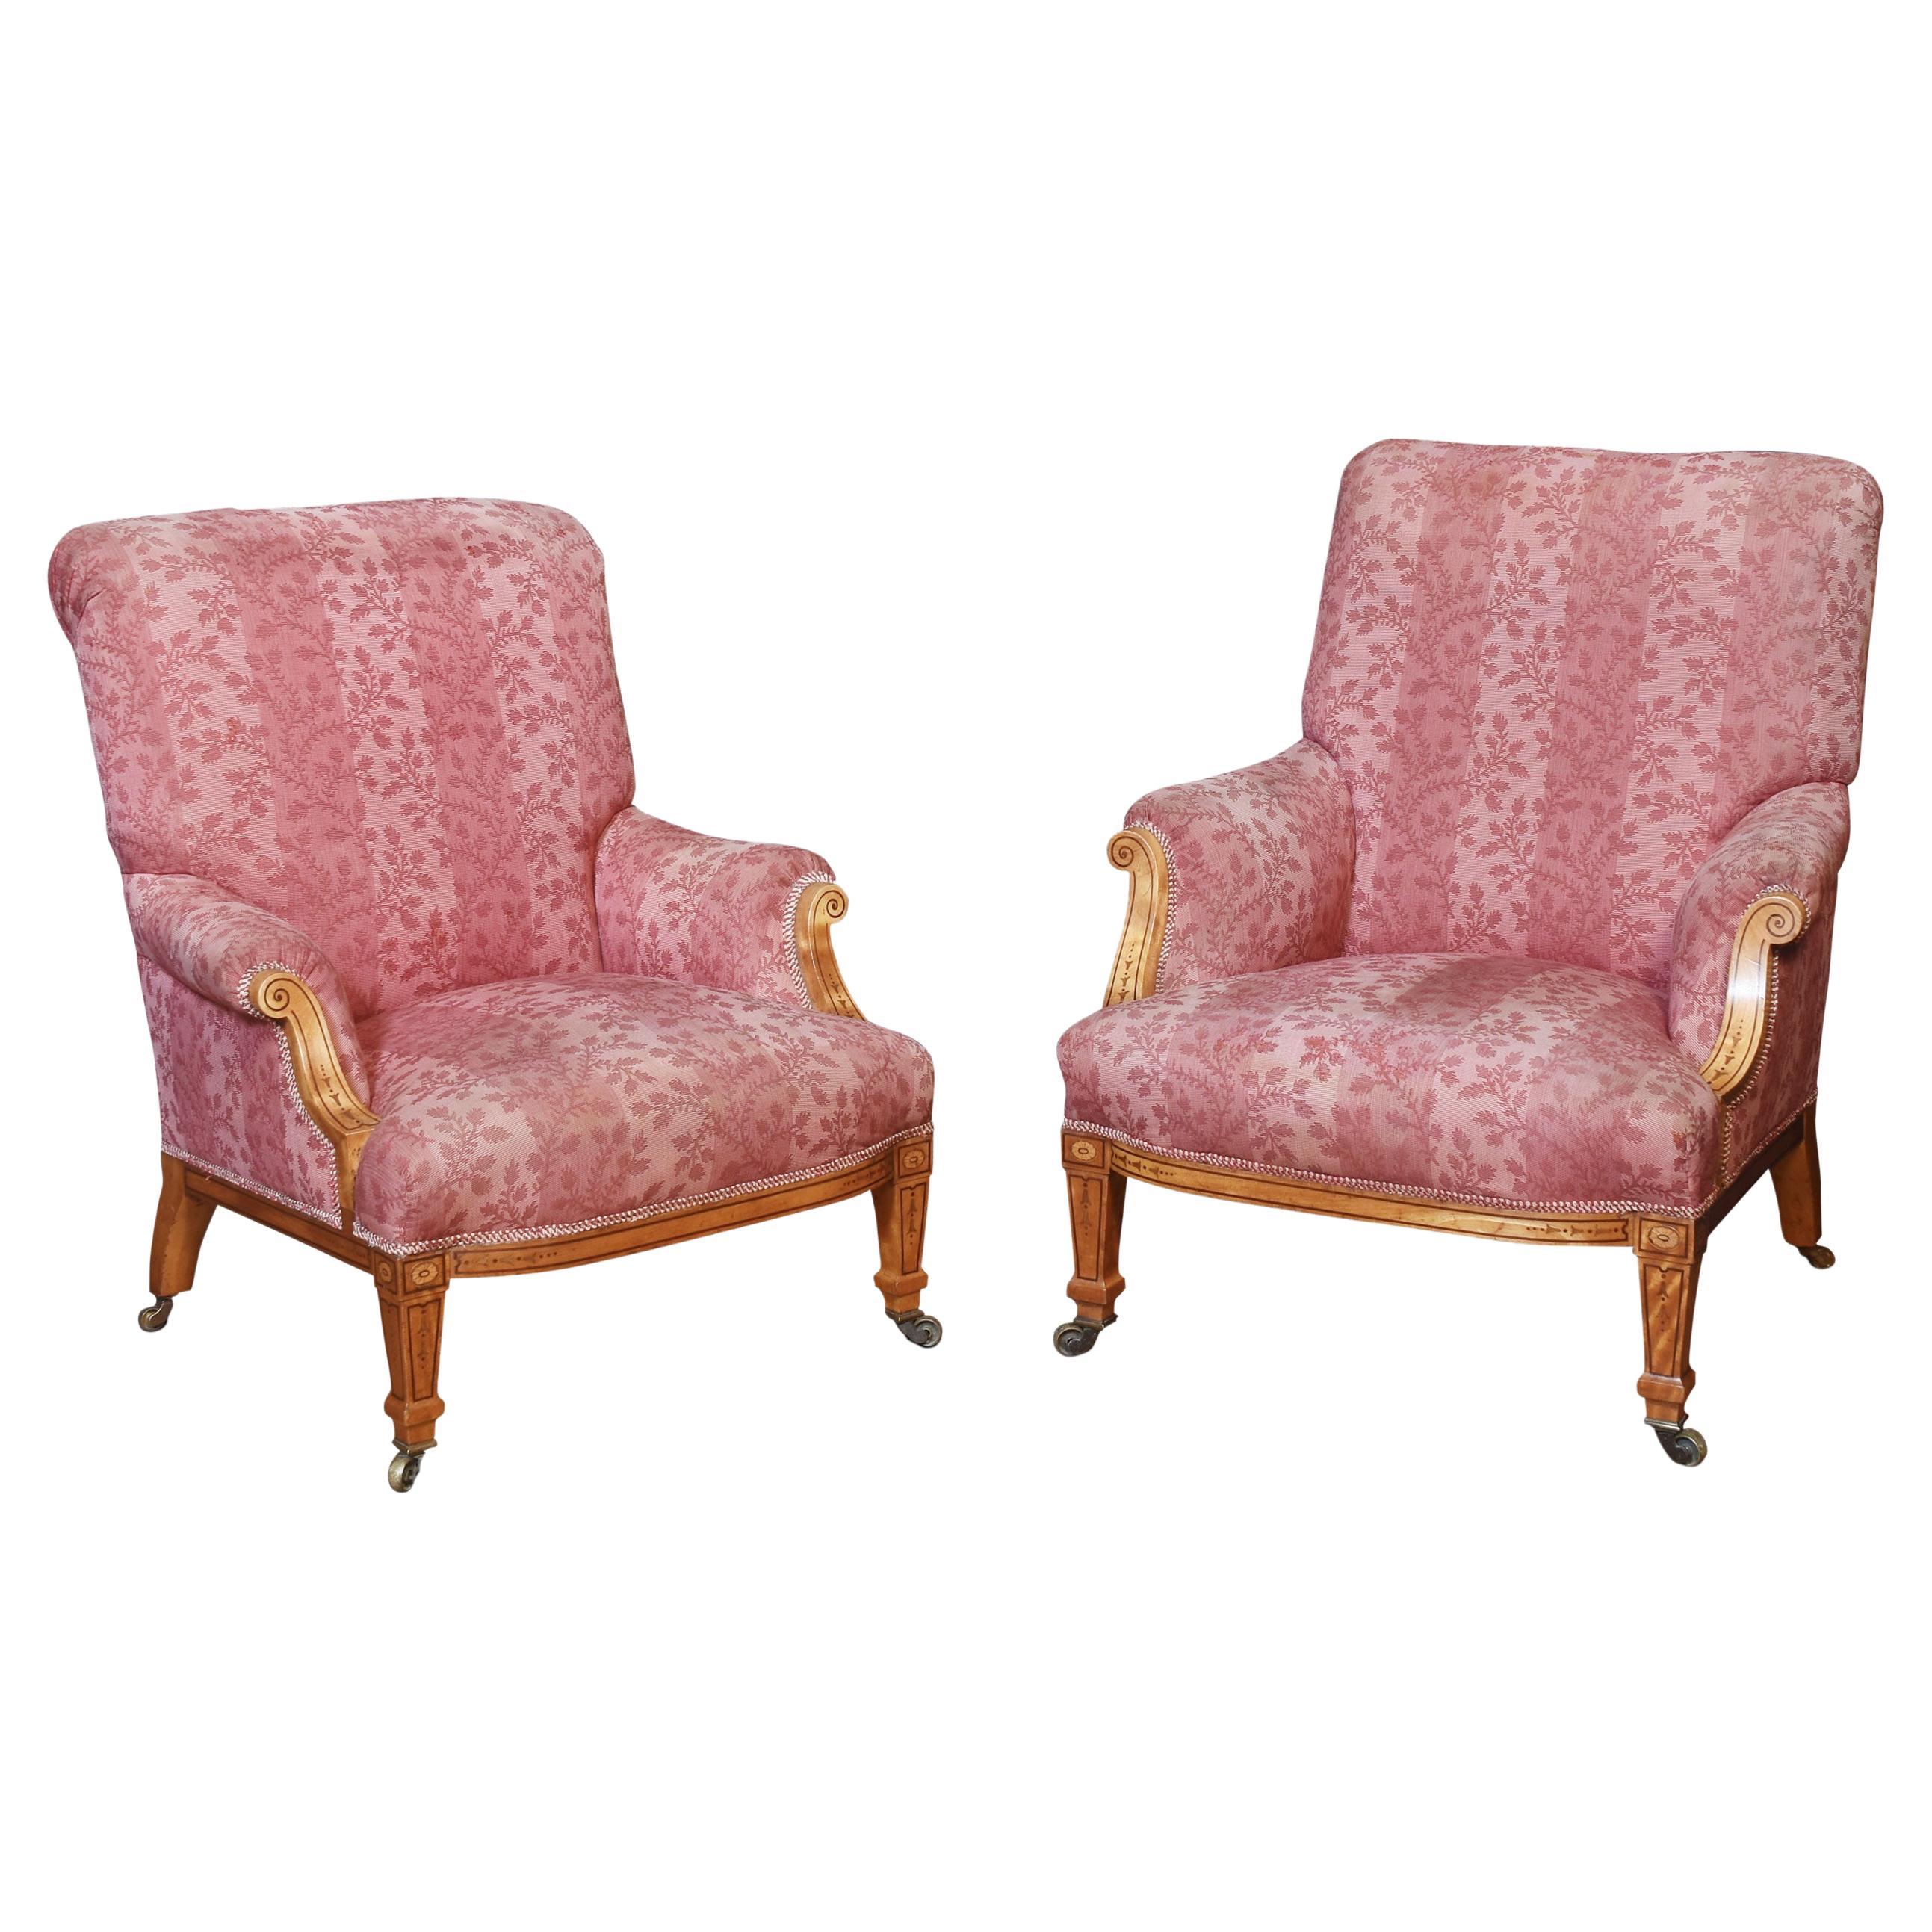 Pair of 19th century satinwood Lounge chairs For Sale